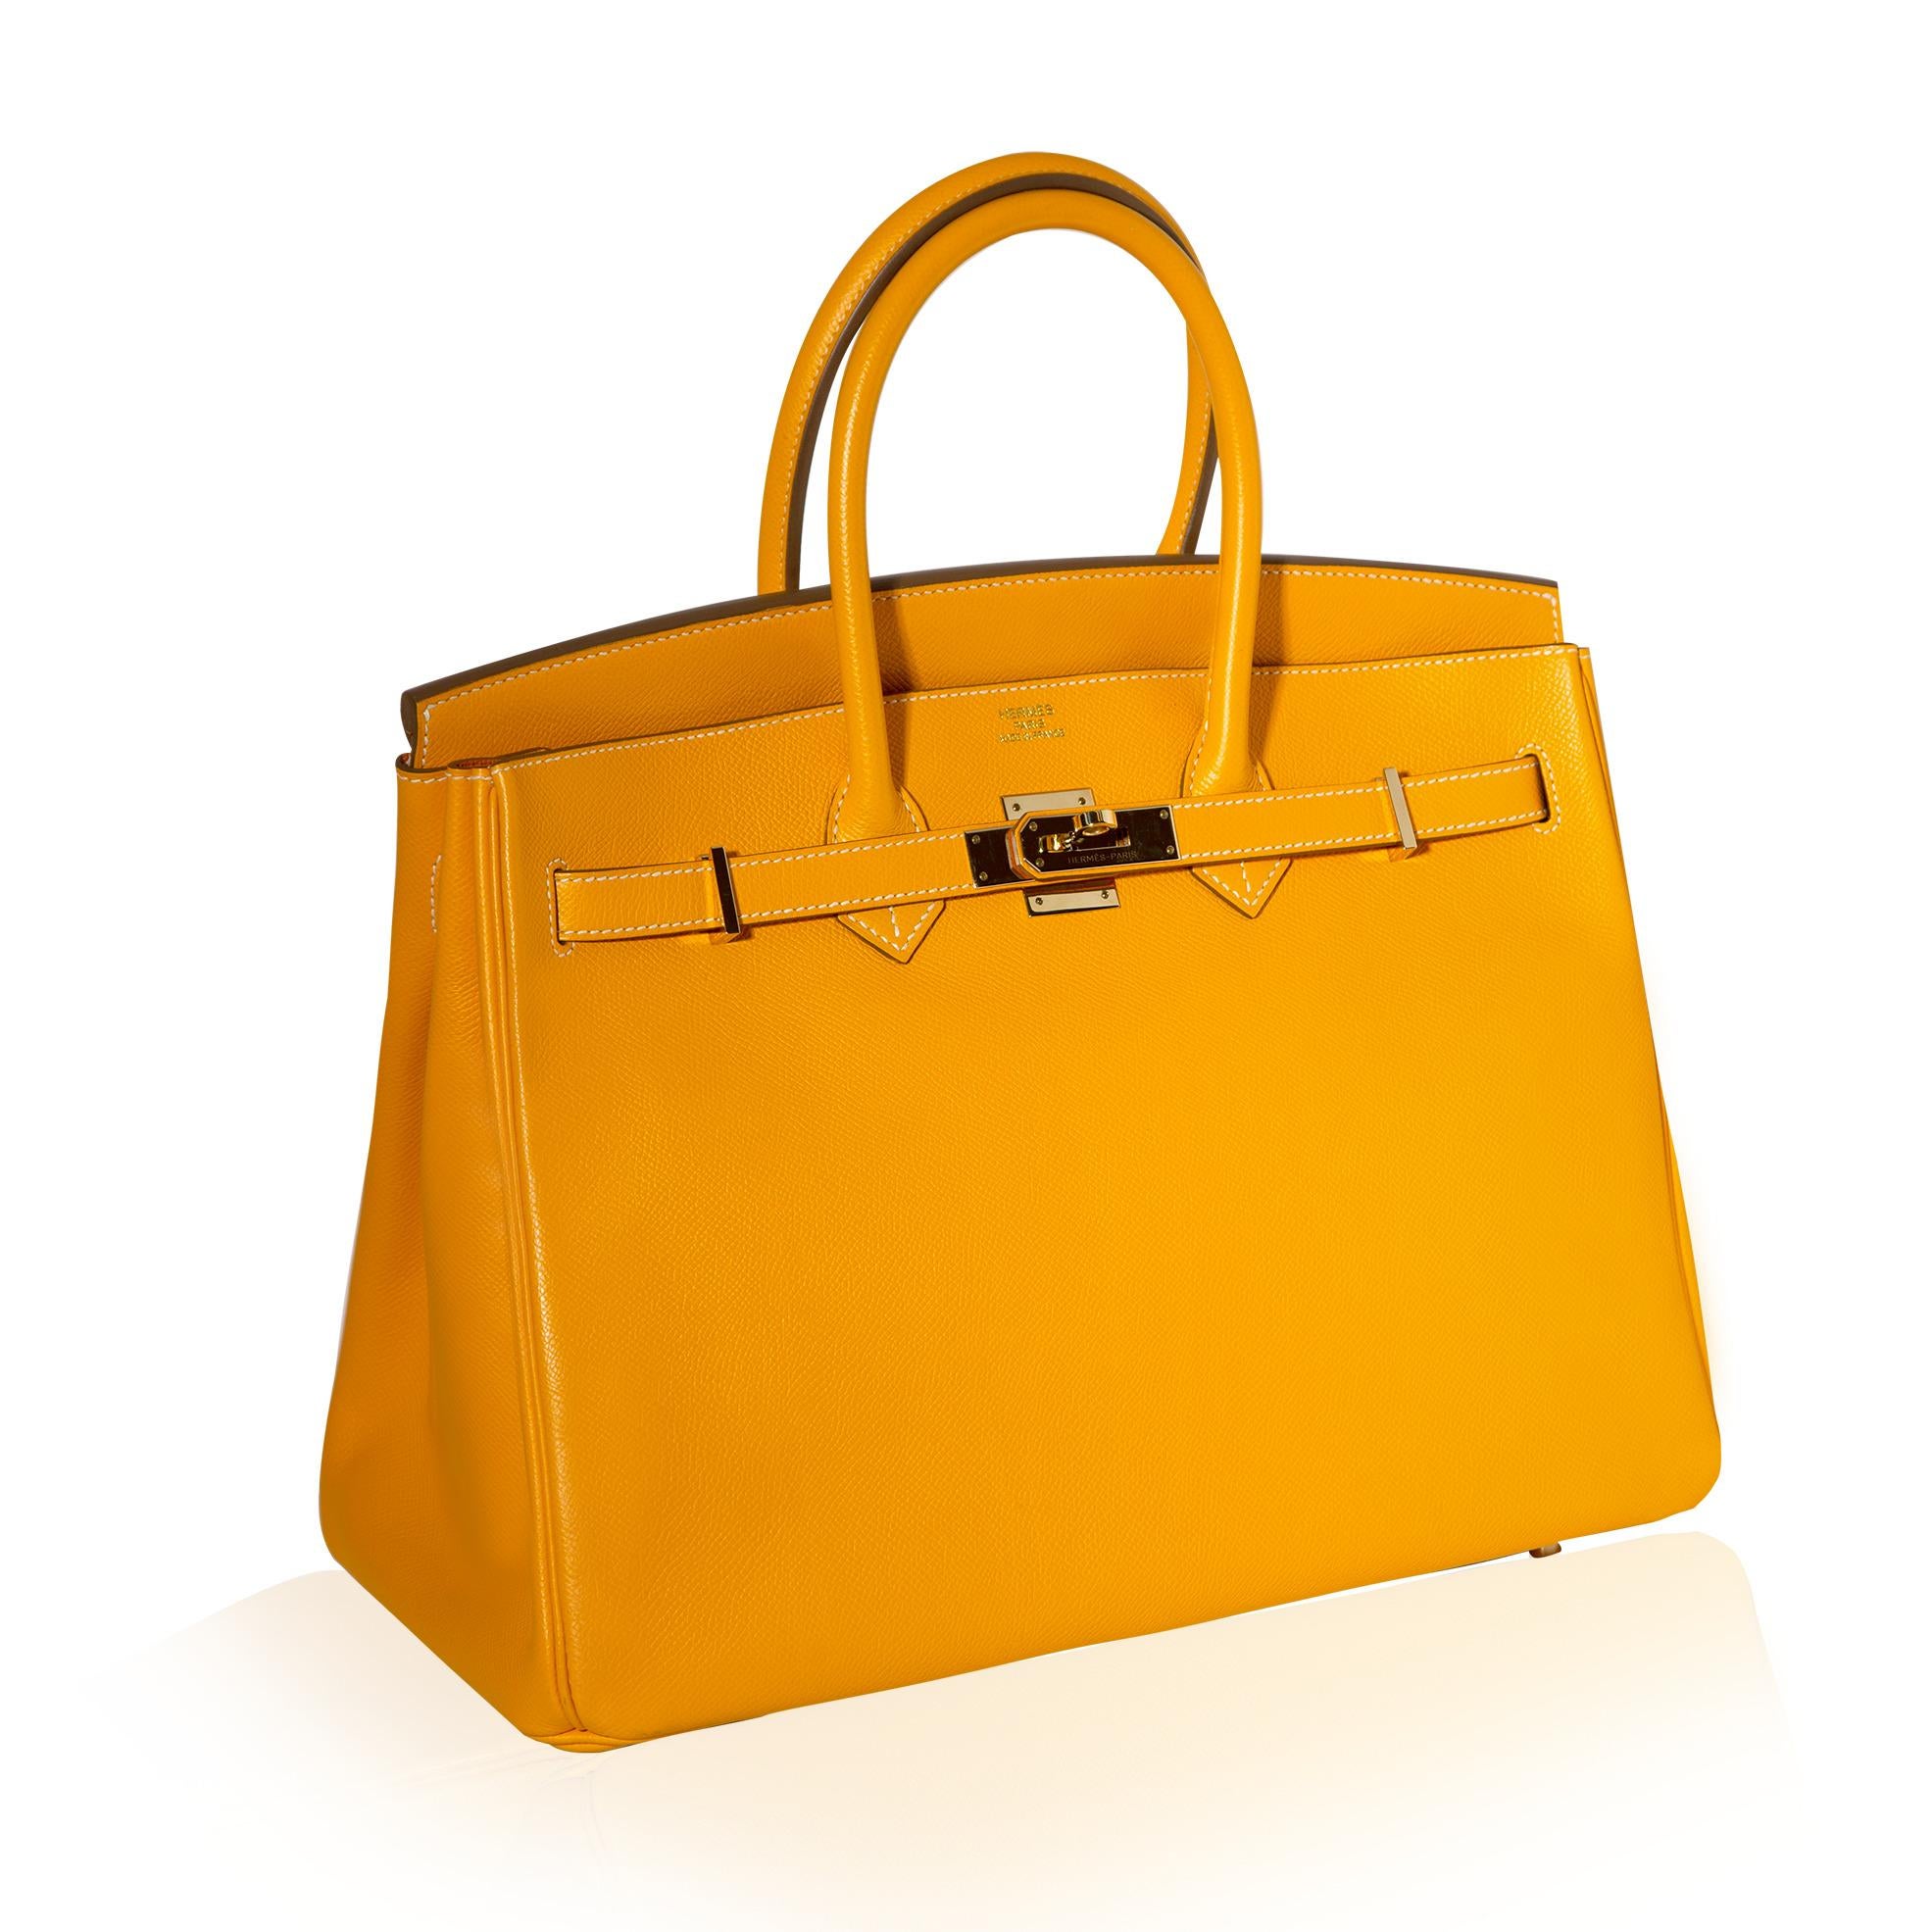 The Hermès Birkin 35cm is crafted from highly sought-after Epsom leather, known for its distinctive appearance, in a calming and beautiful yellow with a potiron colour inside, accented with permabrass hardware.

Composition:
Body (leather